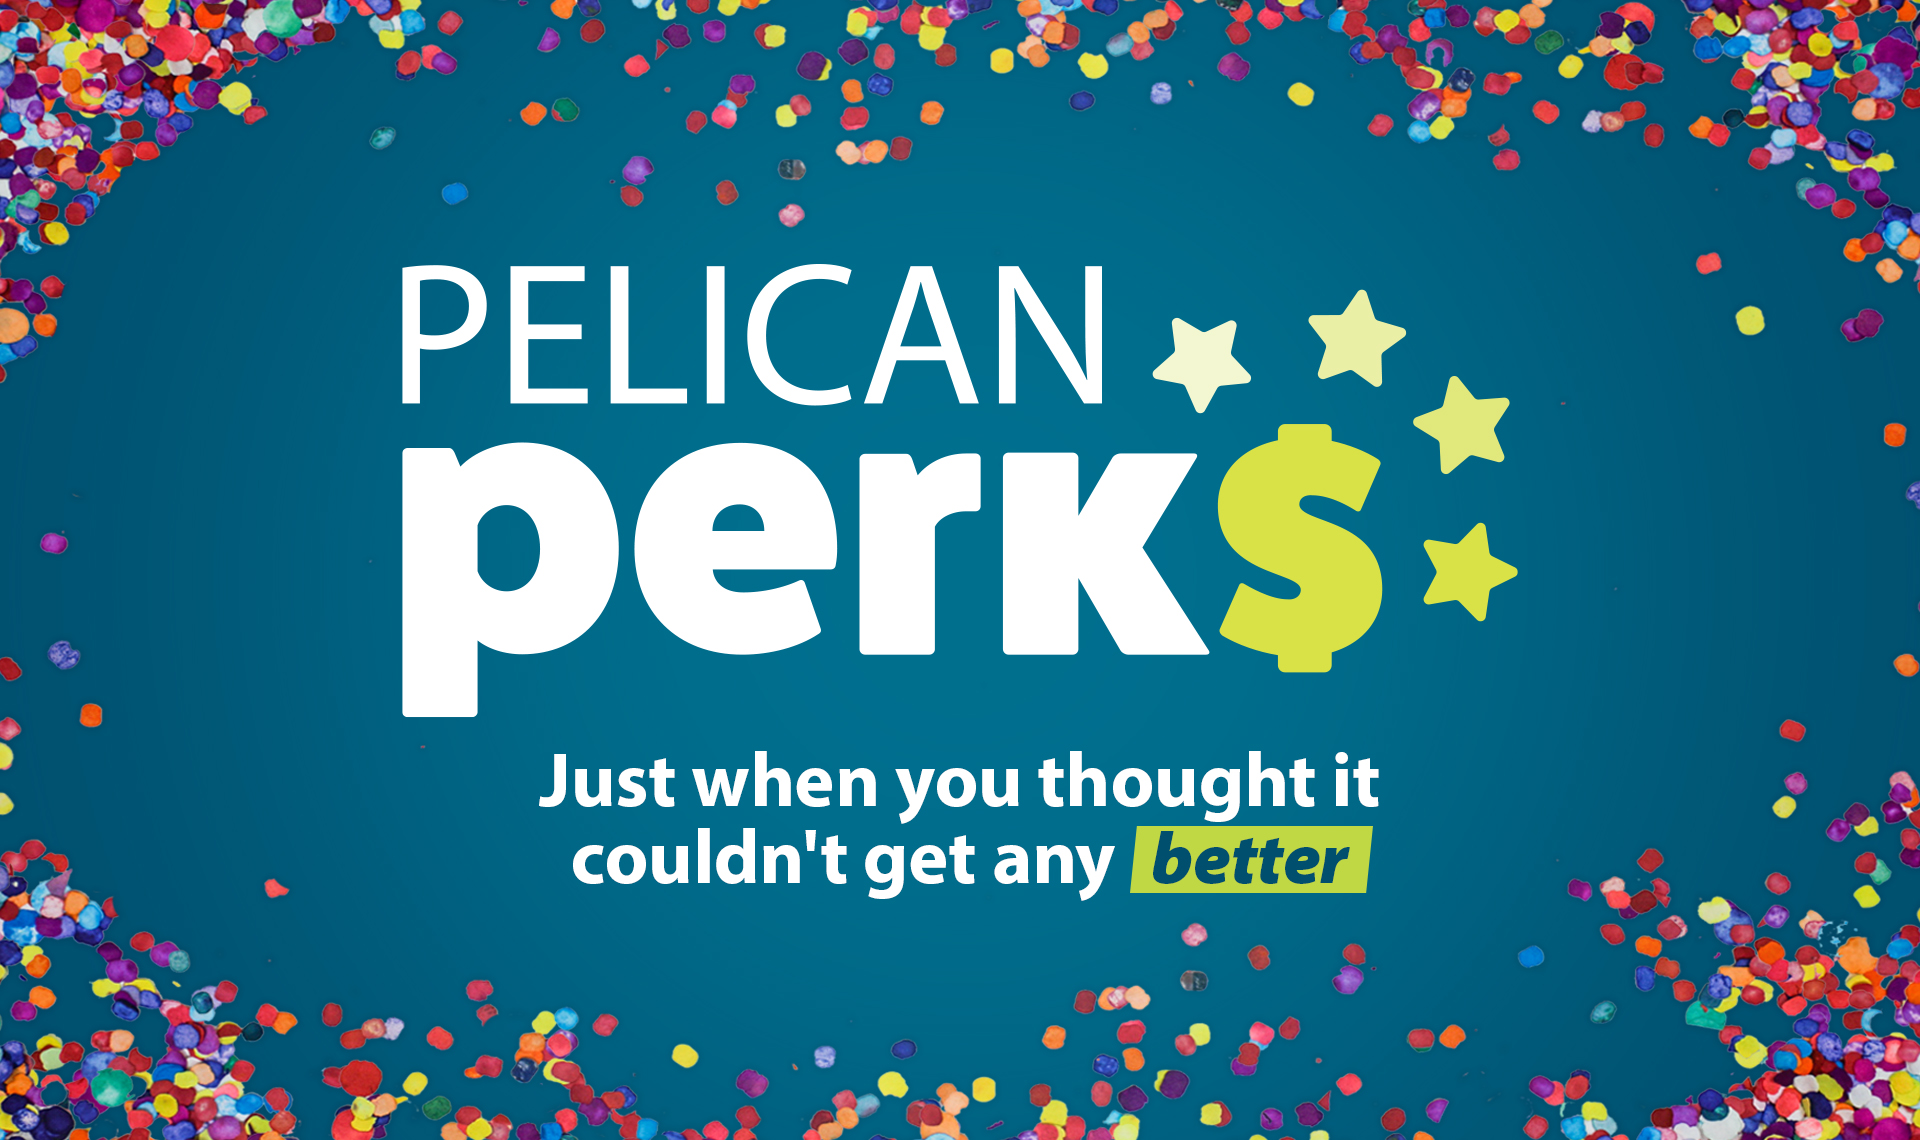 Pelican Perks - Just when you thought it couldn't get any better